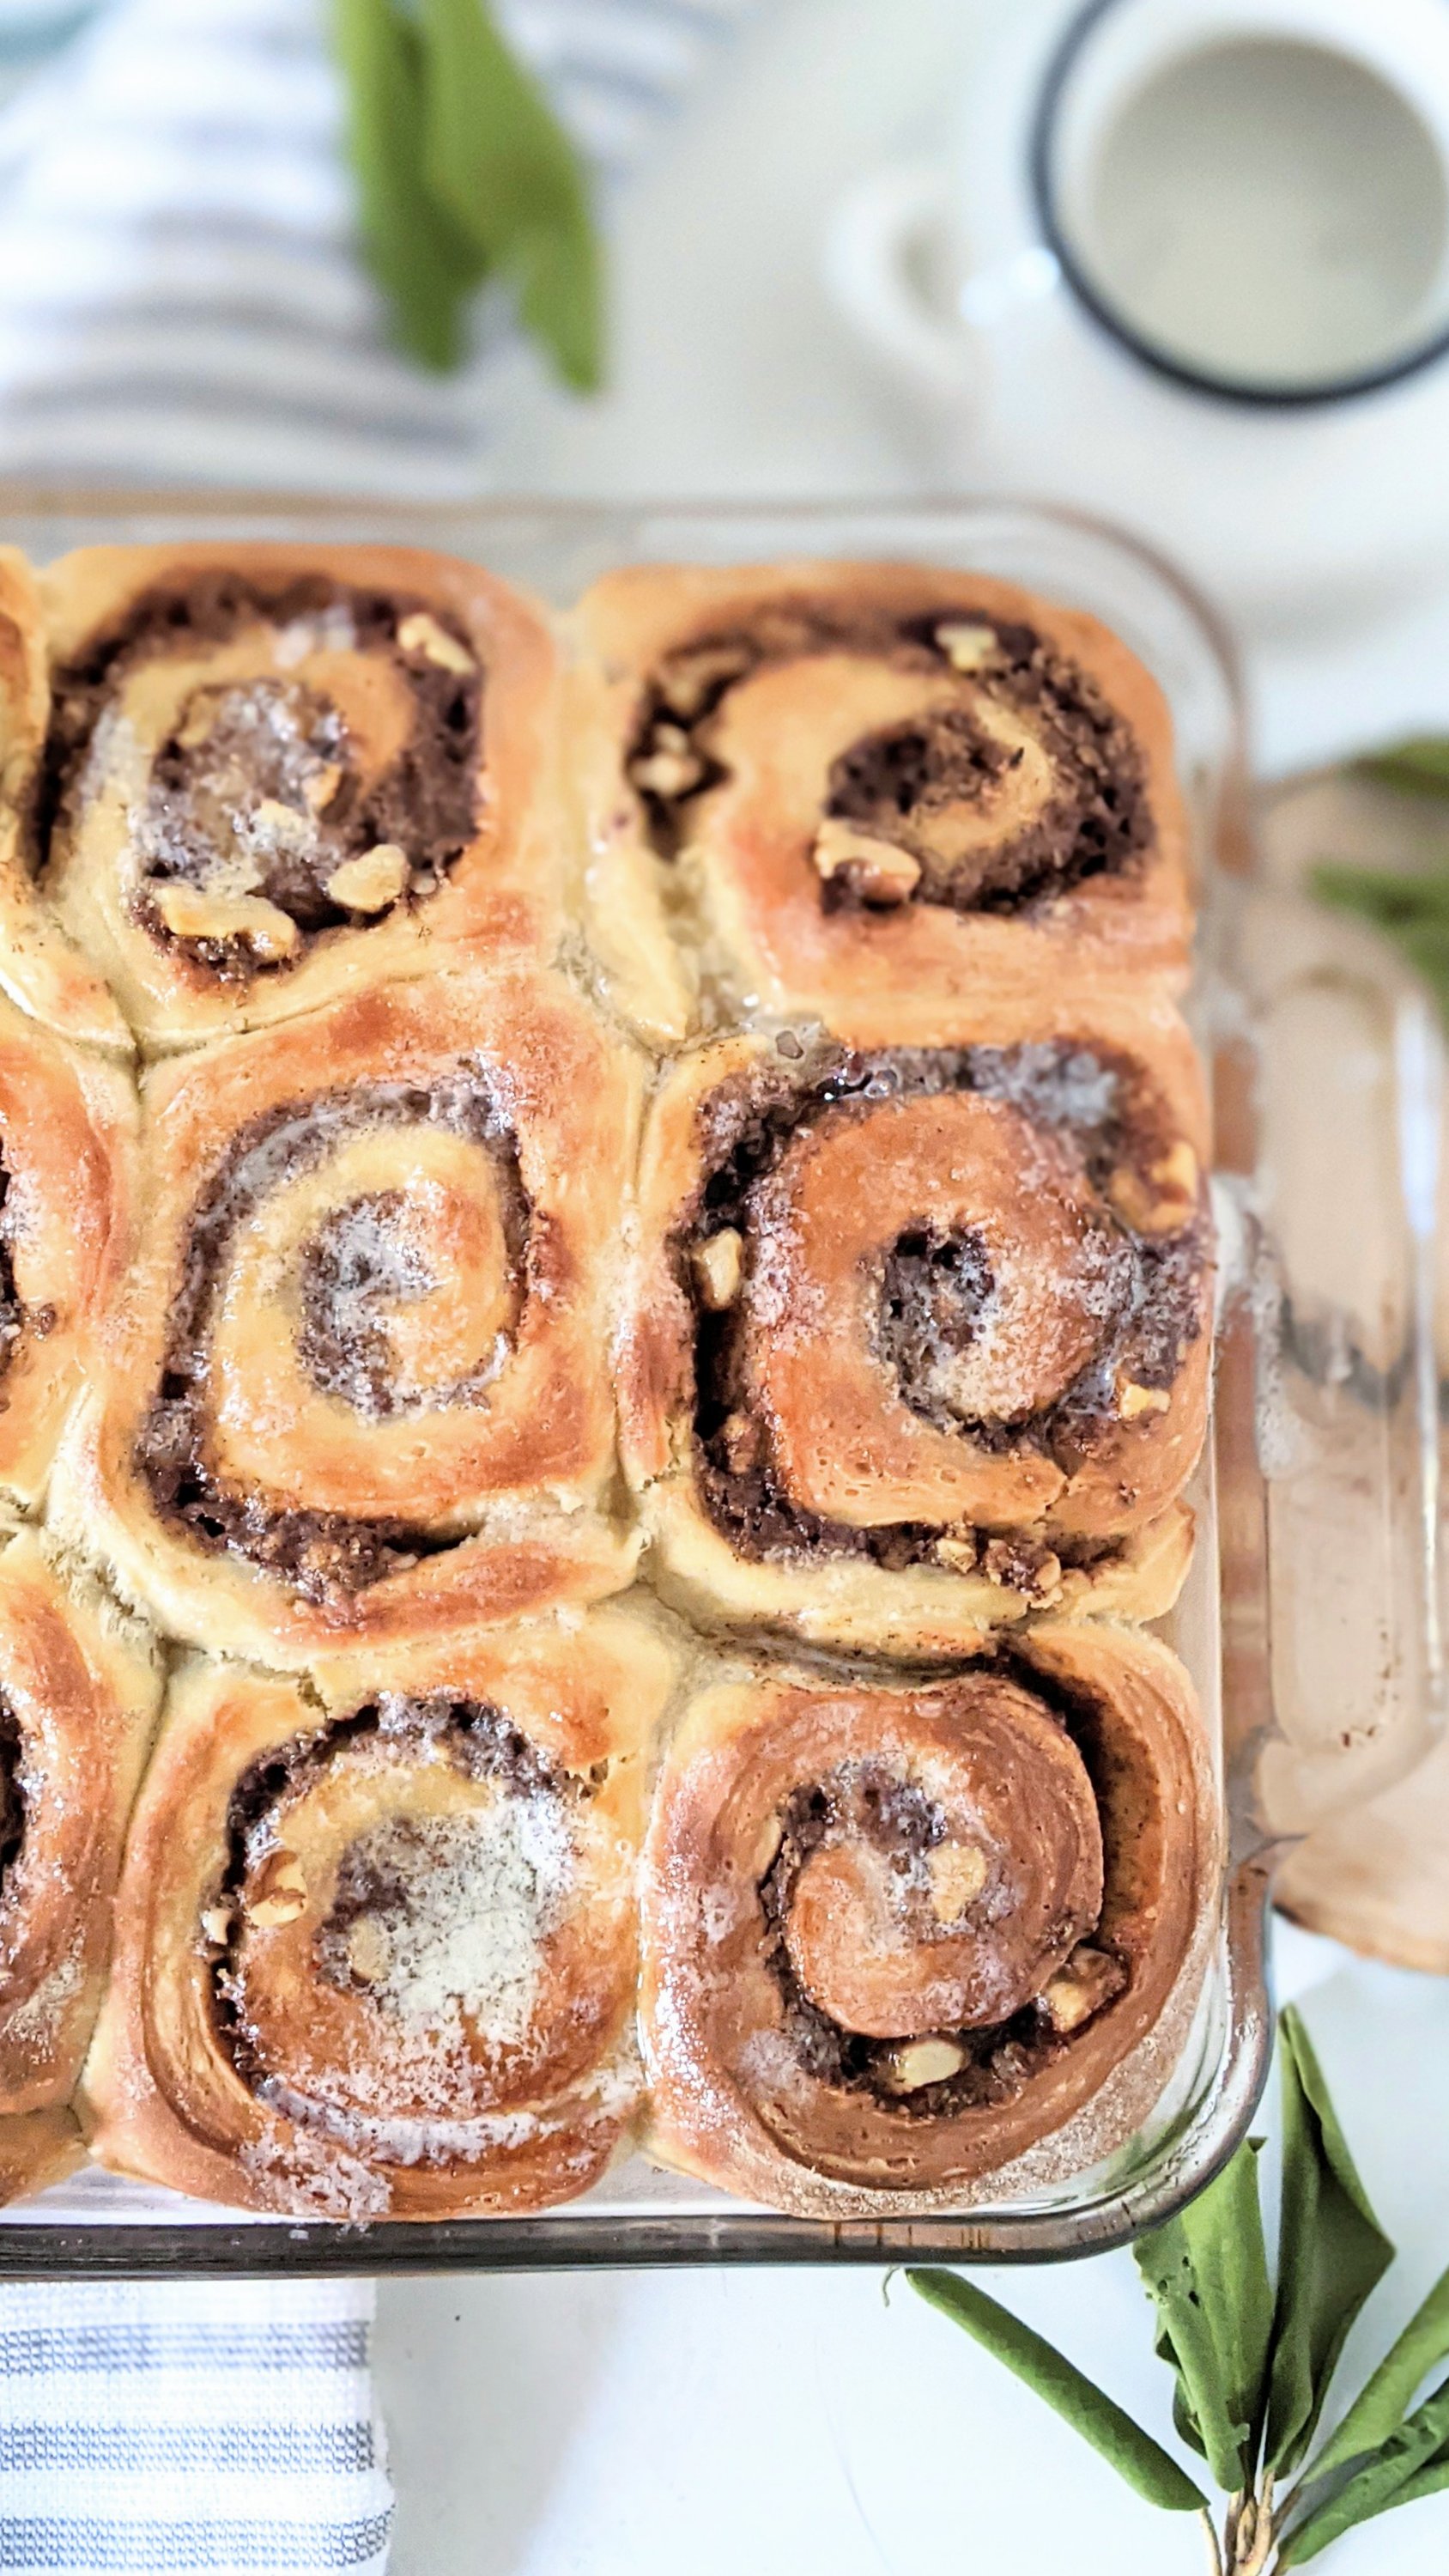 fluffy brioche cinnamon buns with sourdough starter discard recipes best brunch recipes for guests christmas morning breakfasts impress guests